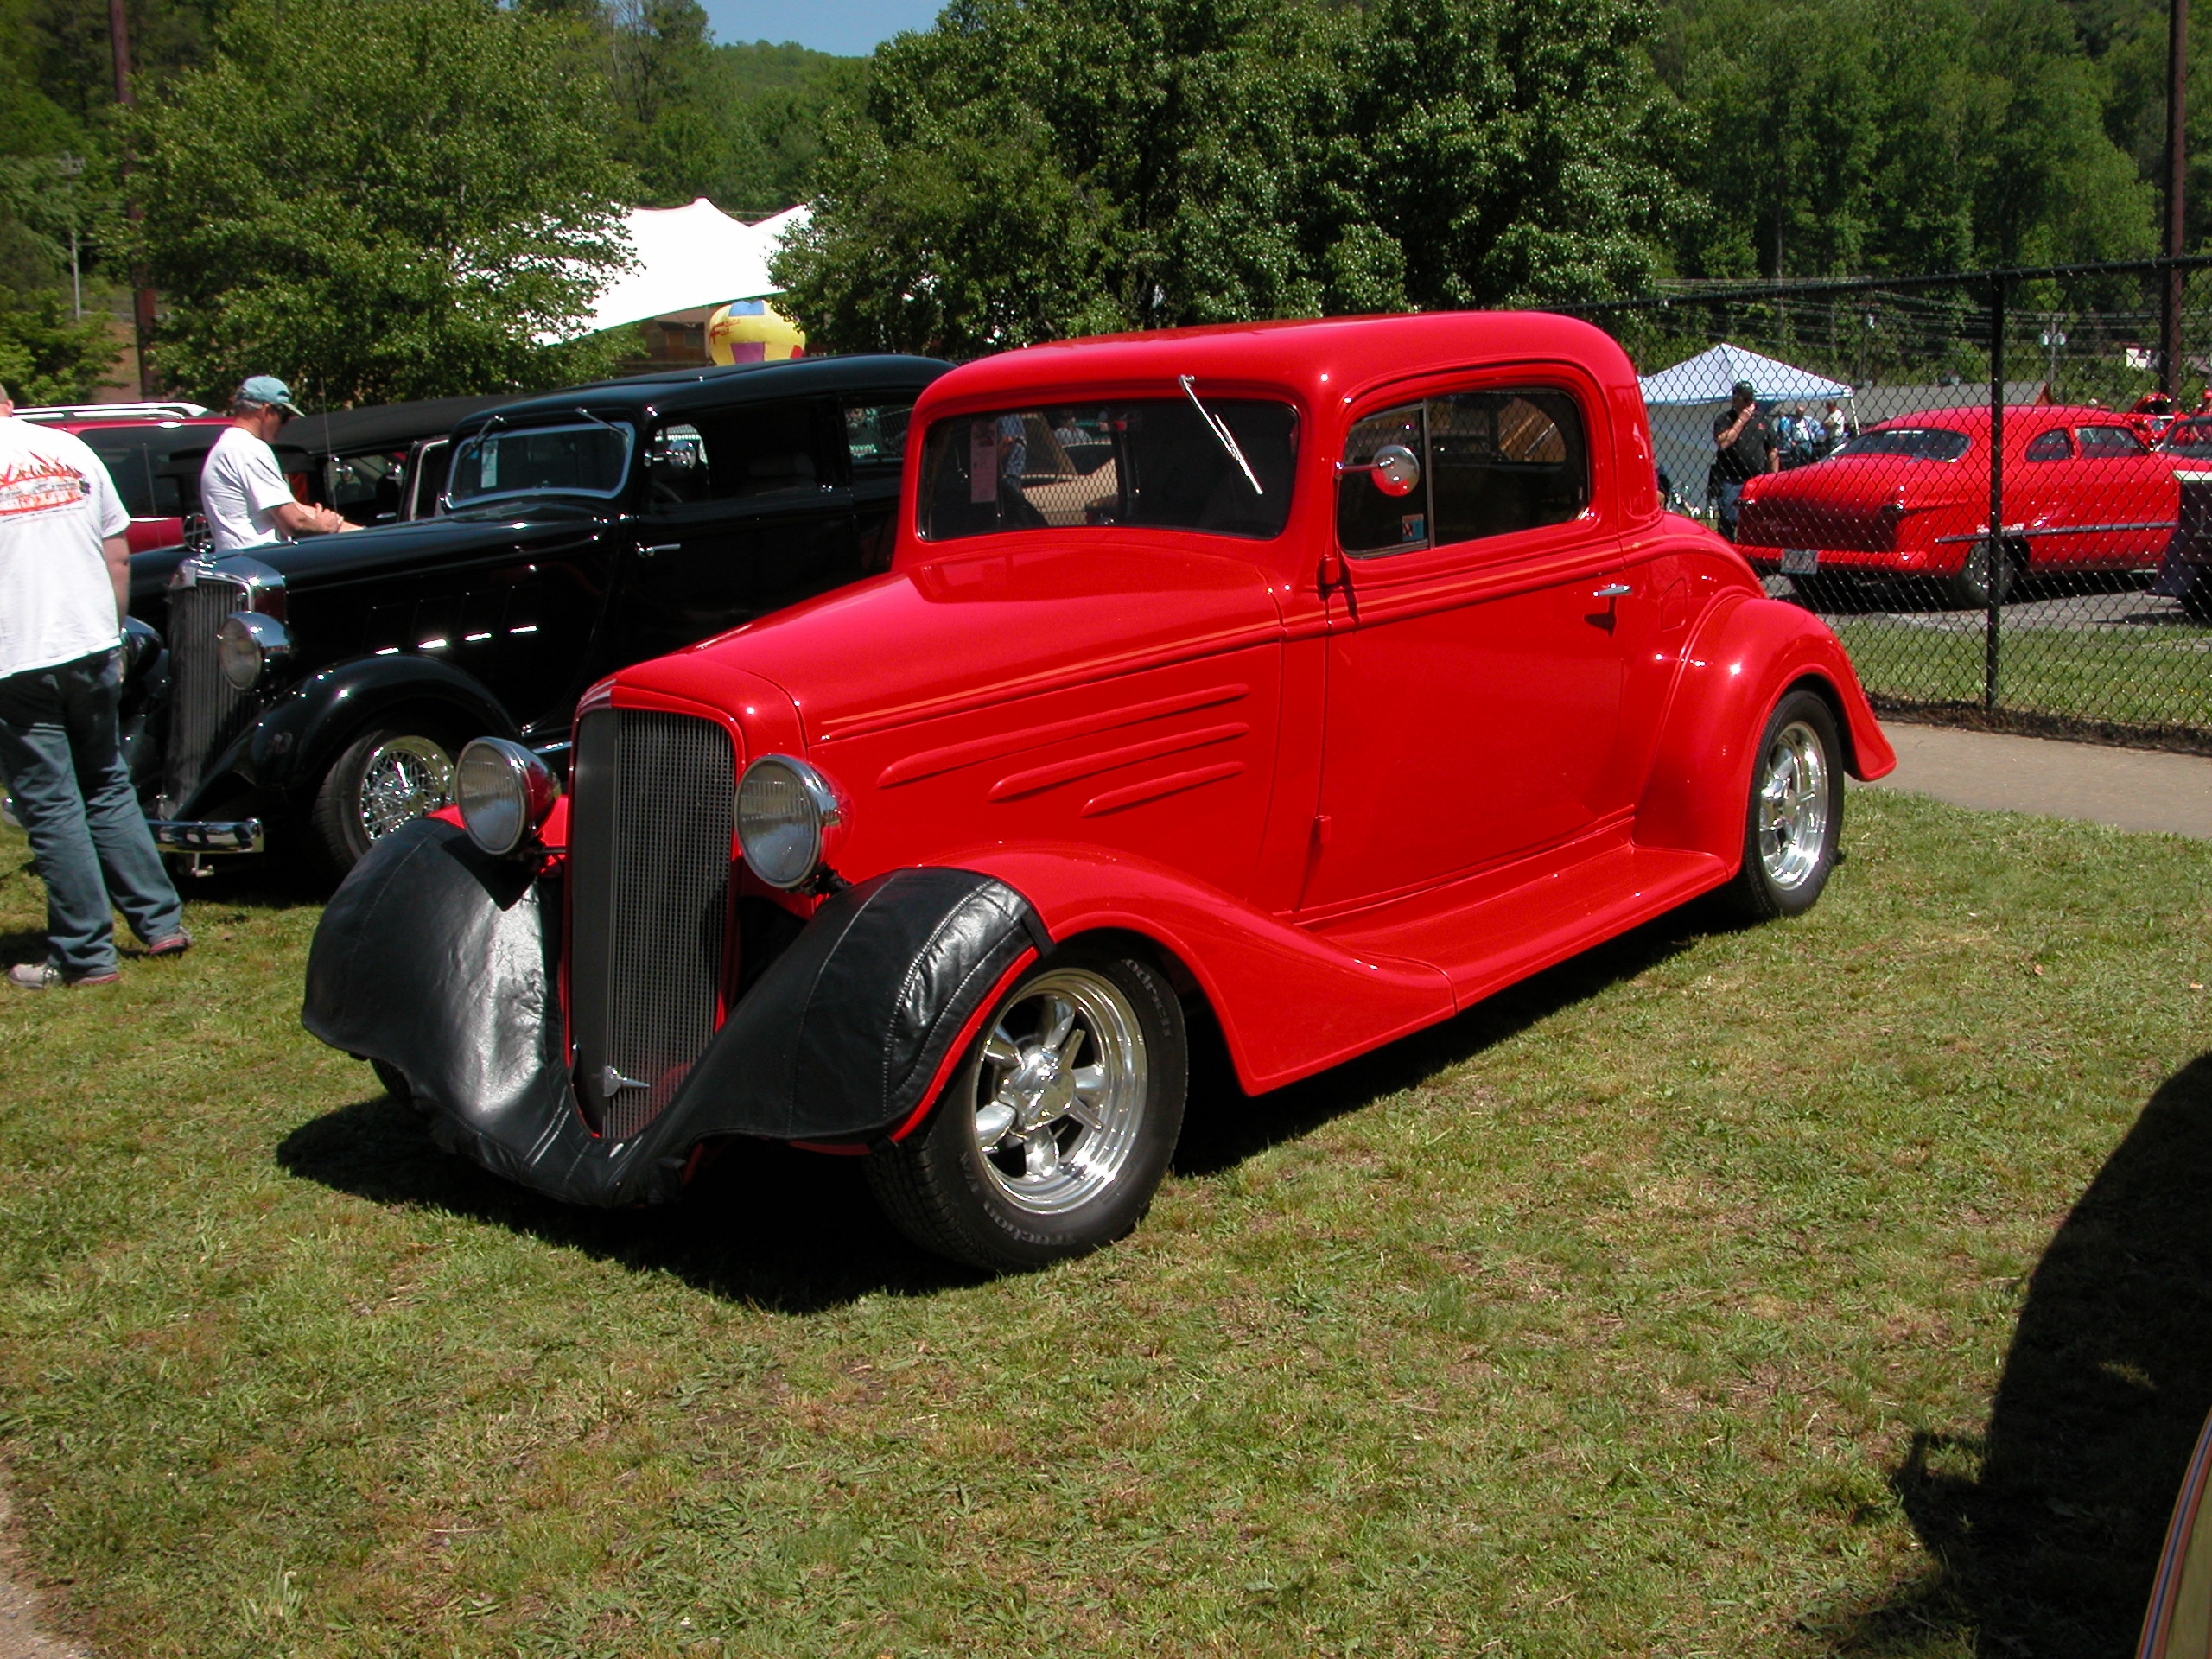 zz top car - 1933 ford couple hot red